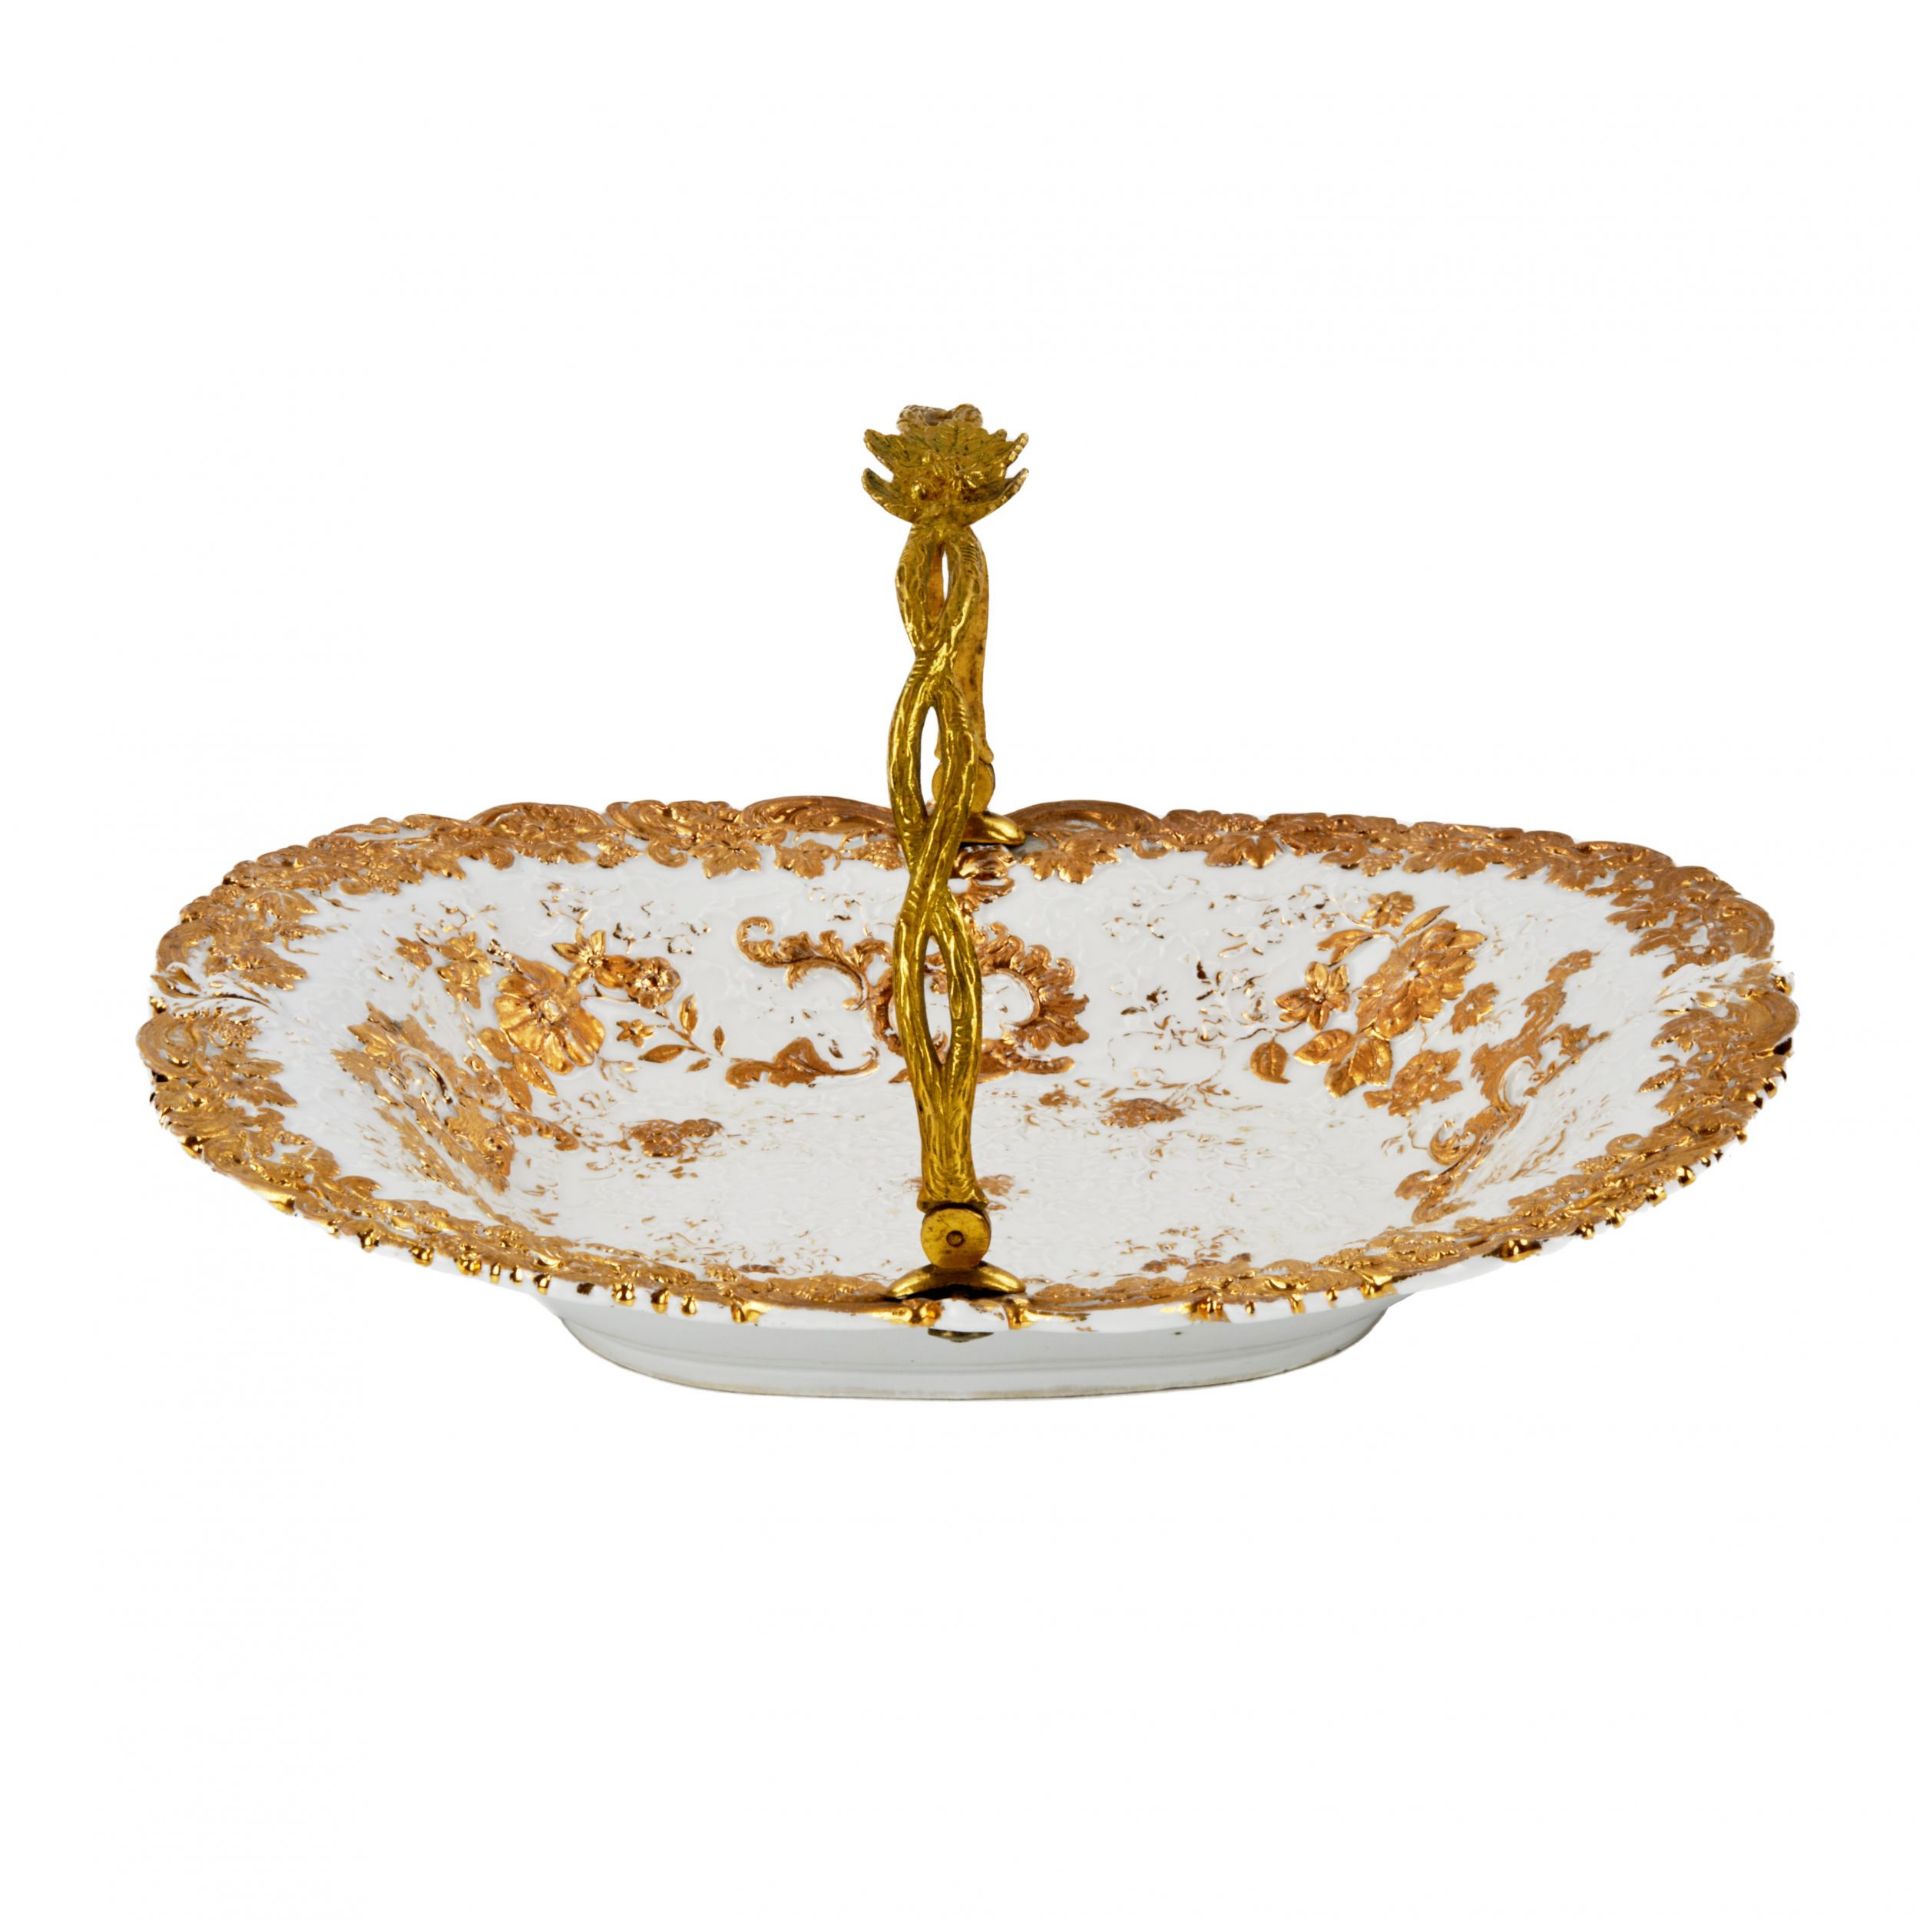 Meissen porcelain dish with metal handle. - Image 3 of 5